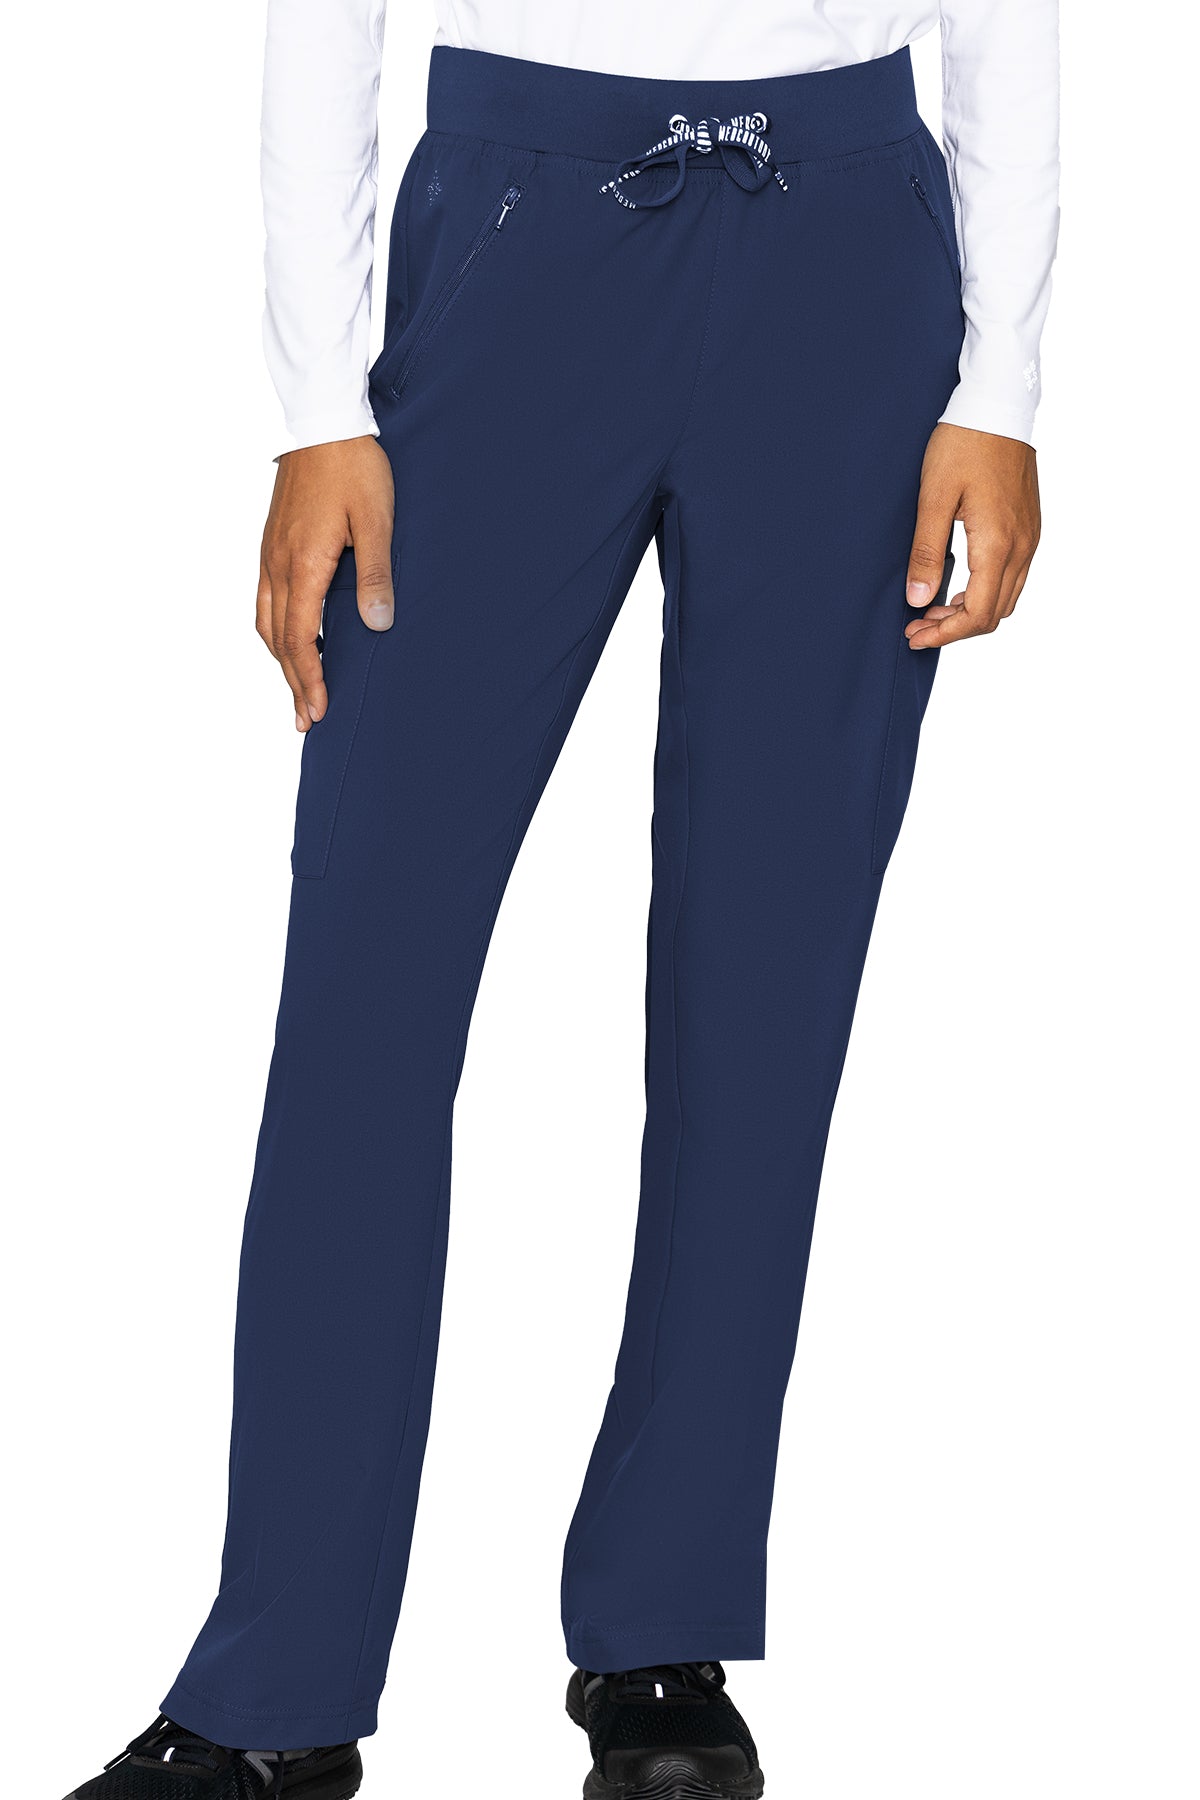 Med Couture Tall Scrub Pants Insight Zipper Pant in Navy at Parker's Clothing and Shoes.